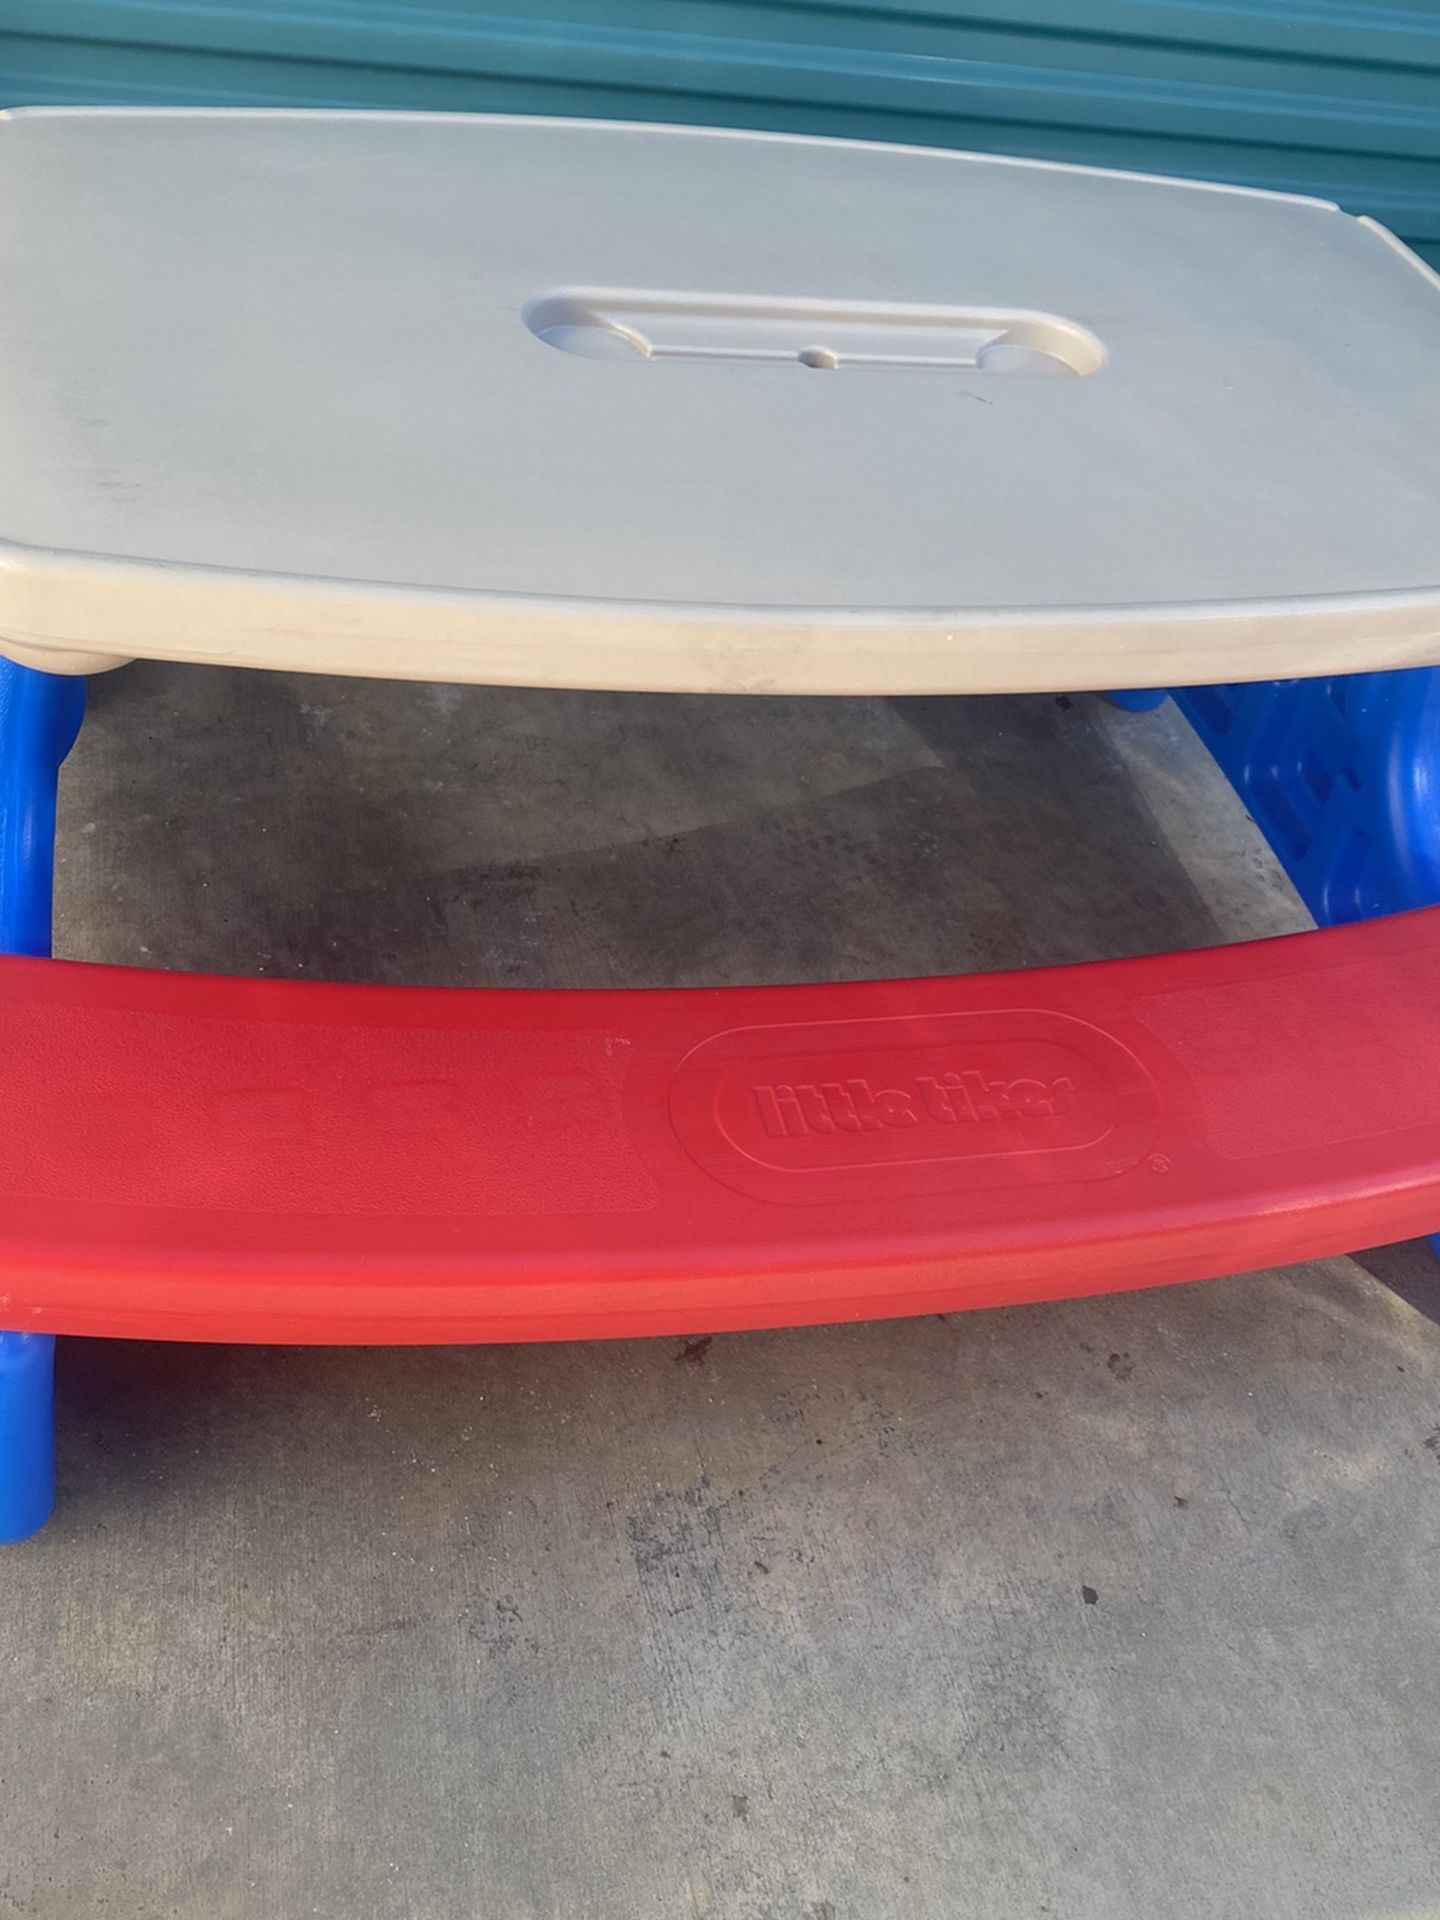 Kids Little Tikes Folding Picnic Table In Great Condition